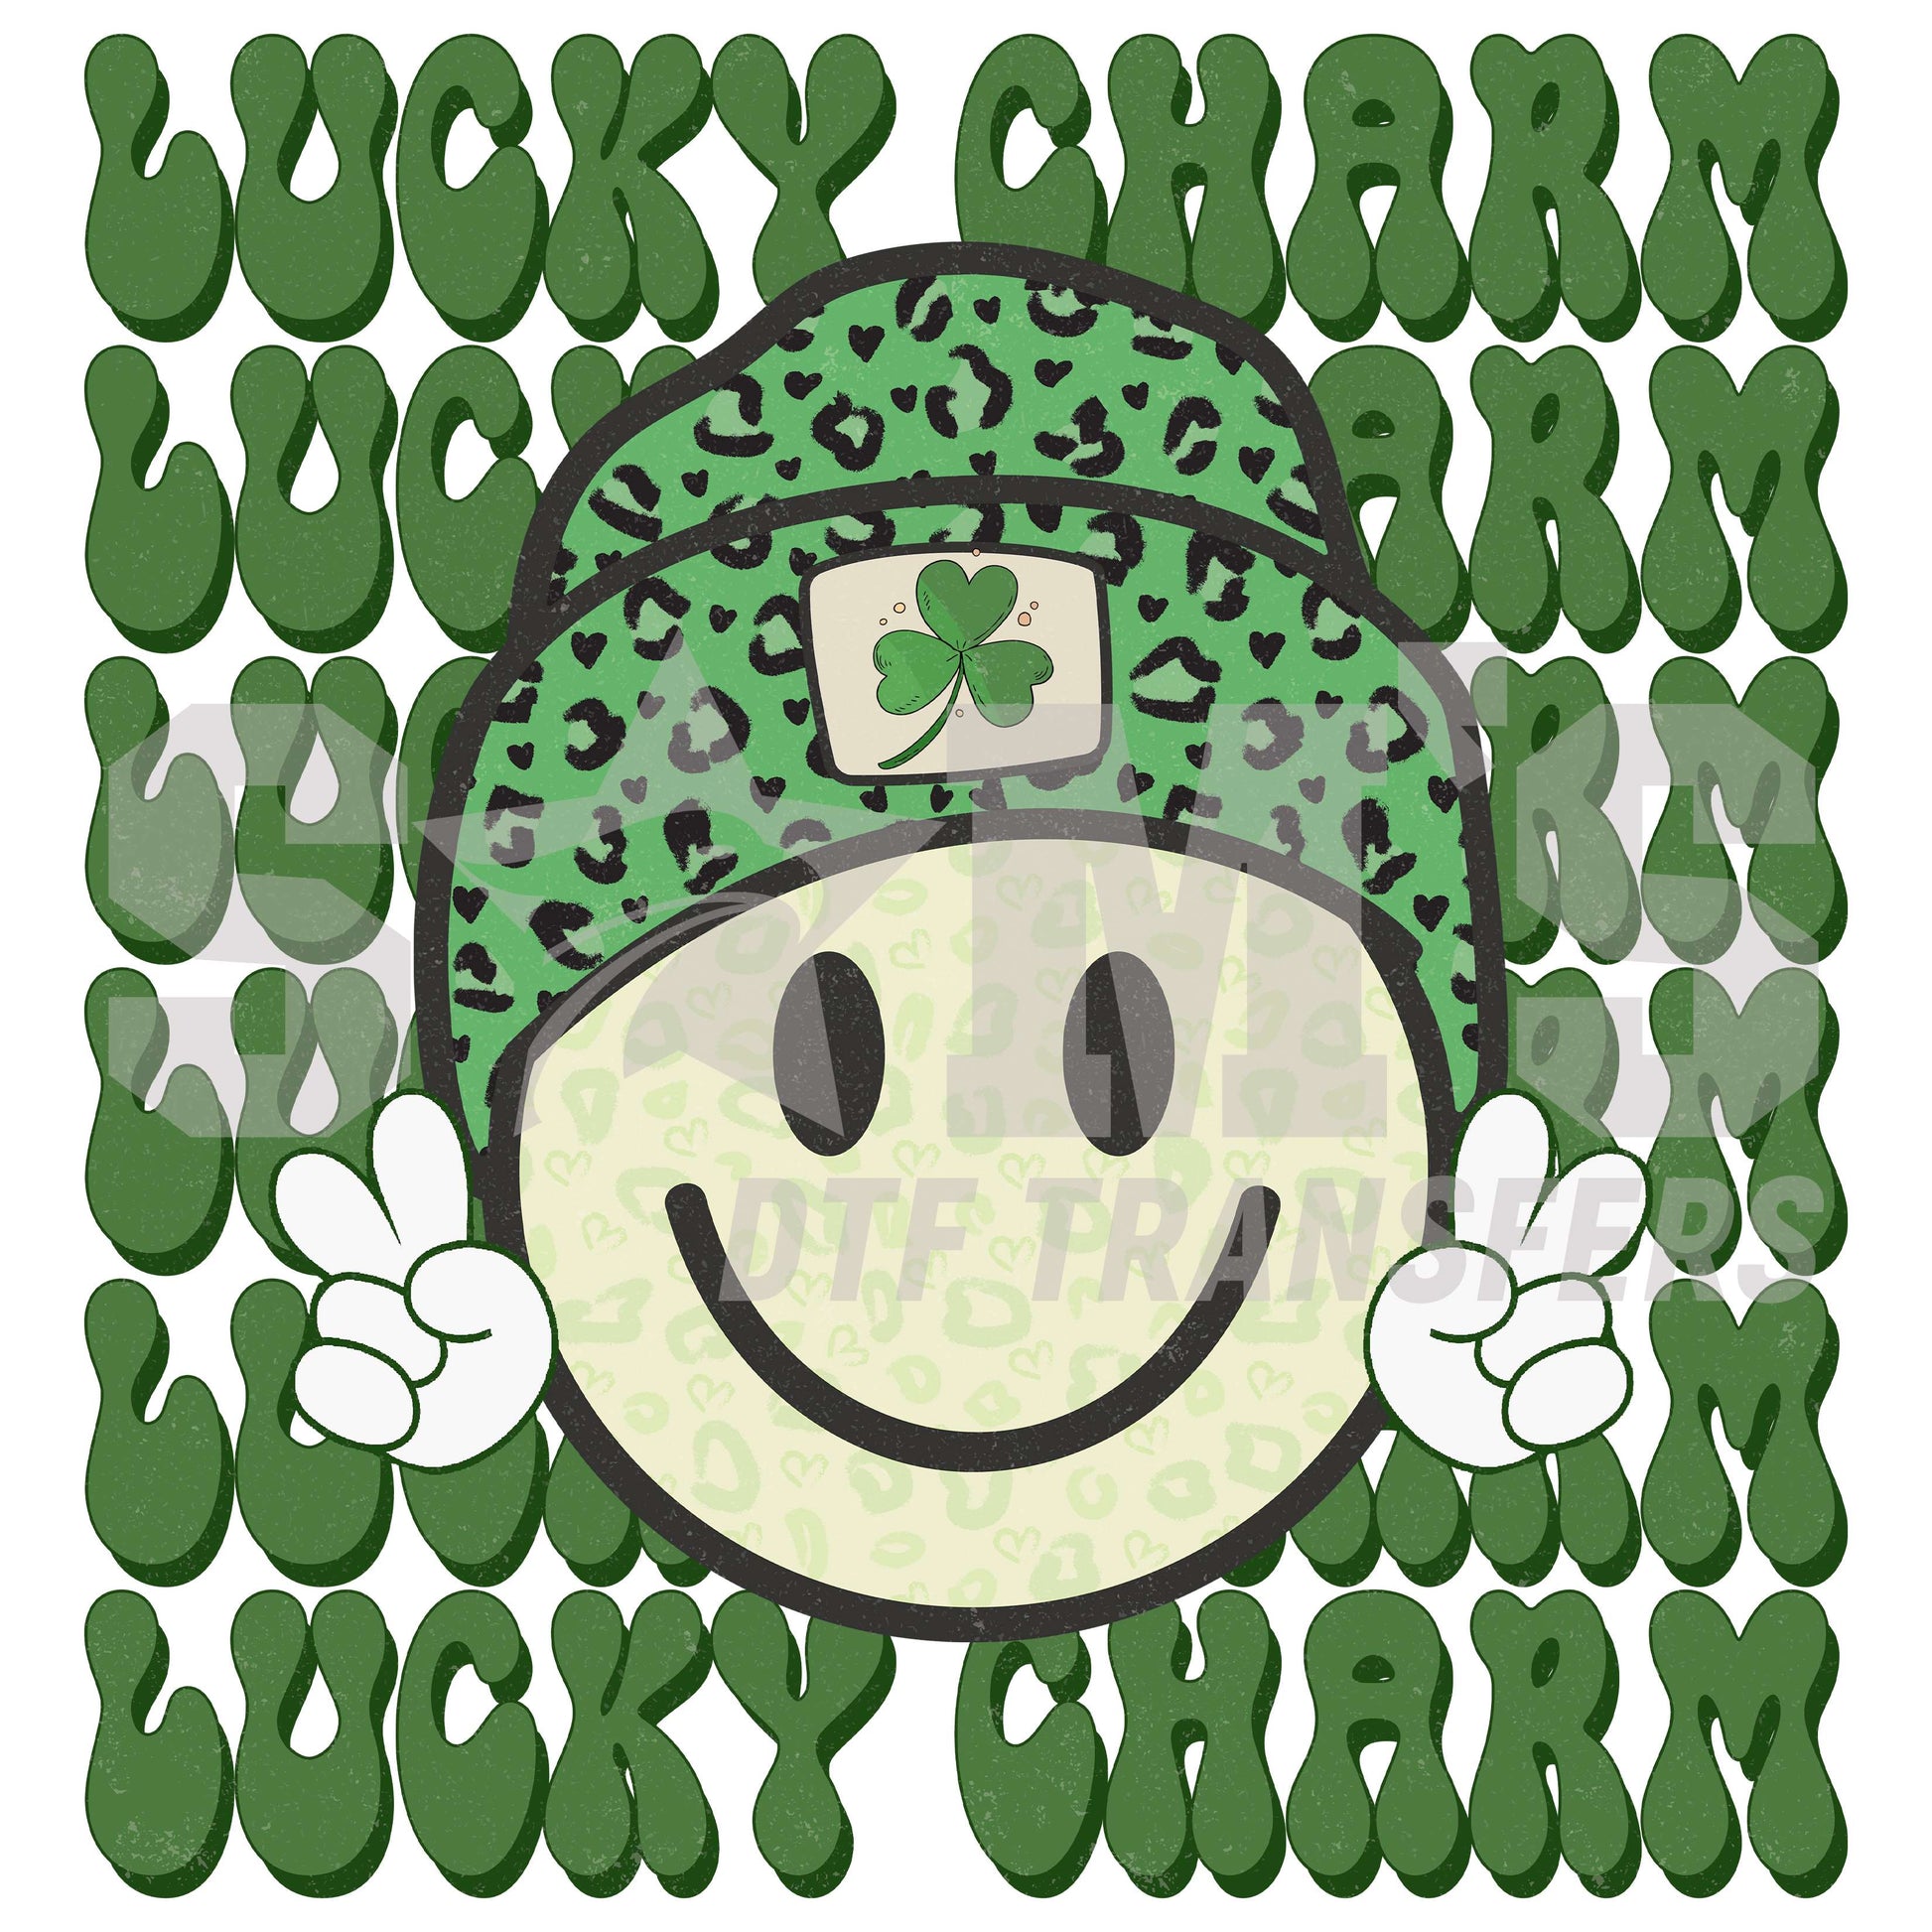 A cheerful face with a green leopard print hat and a four-leaf clover, surrounded by 'Lucky Charm' text in a St. Patrick's Day theme.